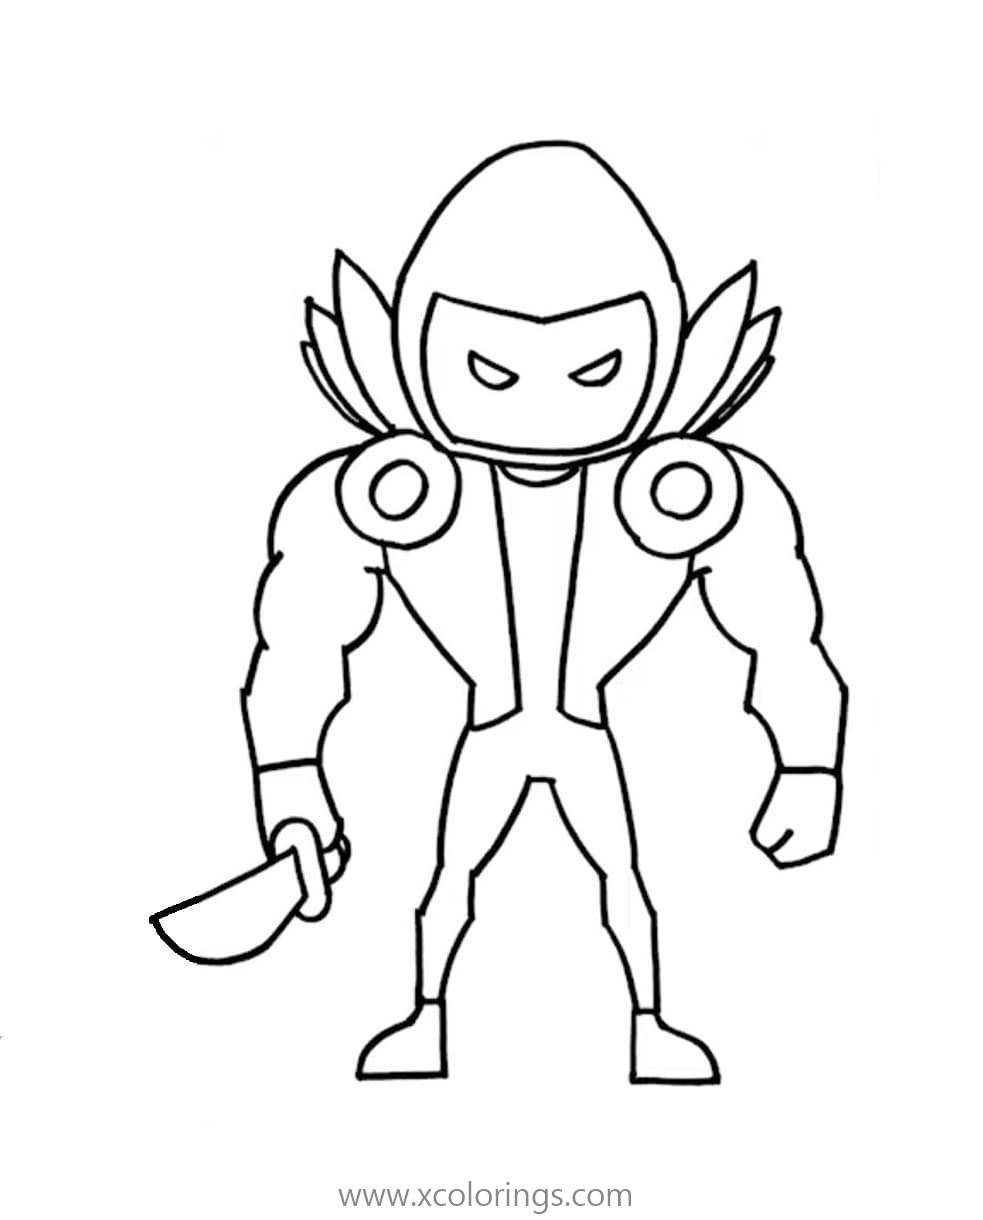 Dominus from Roblox Coloring Pages - XColorings.com